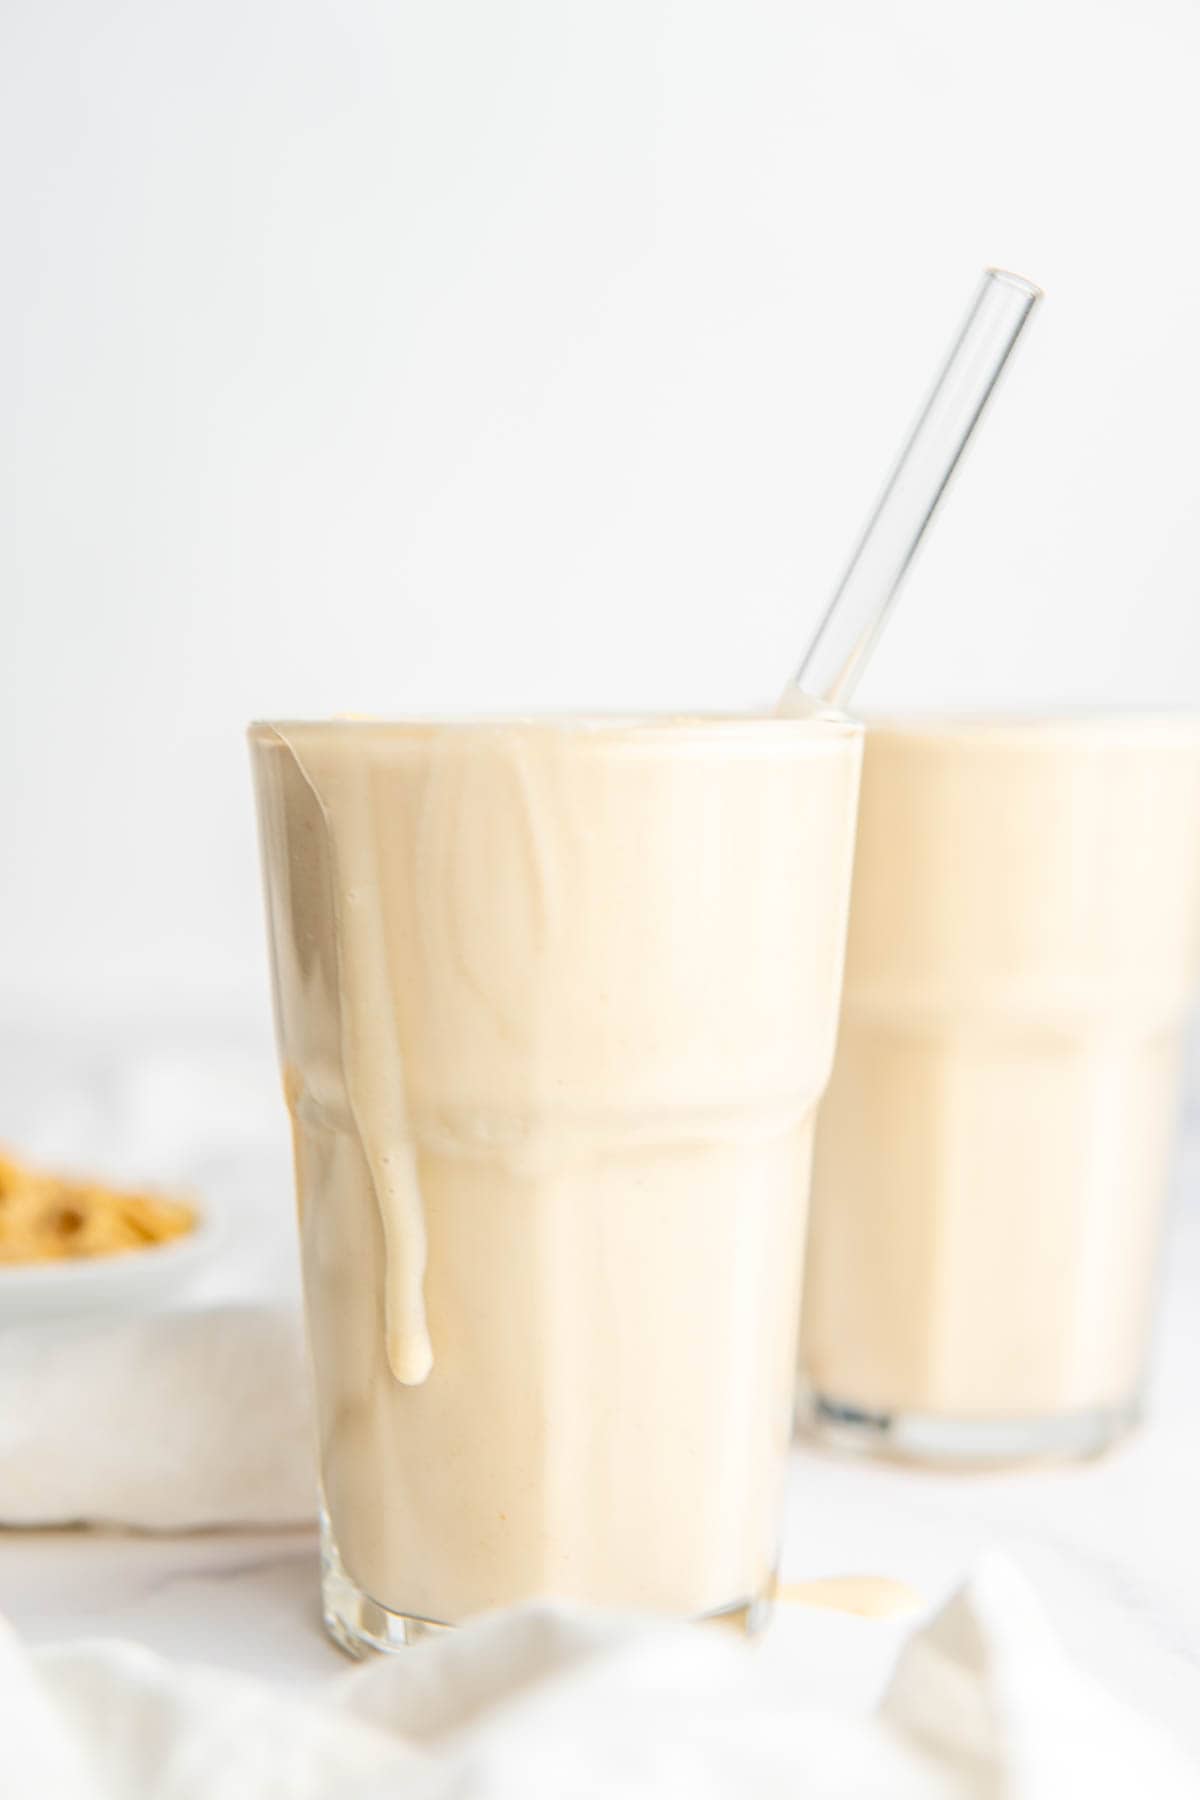 A glass full of thick, creamy smoothie with a glass straw sticking out. 